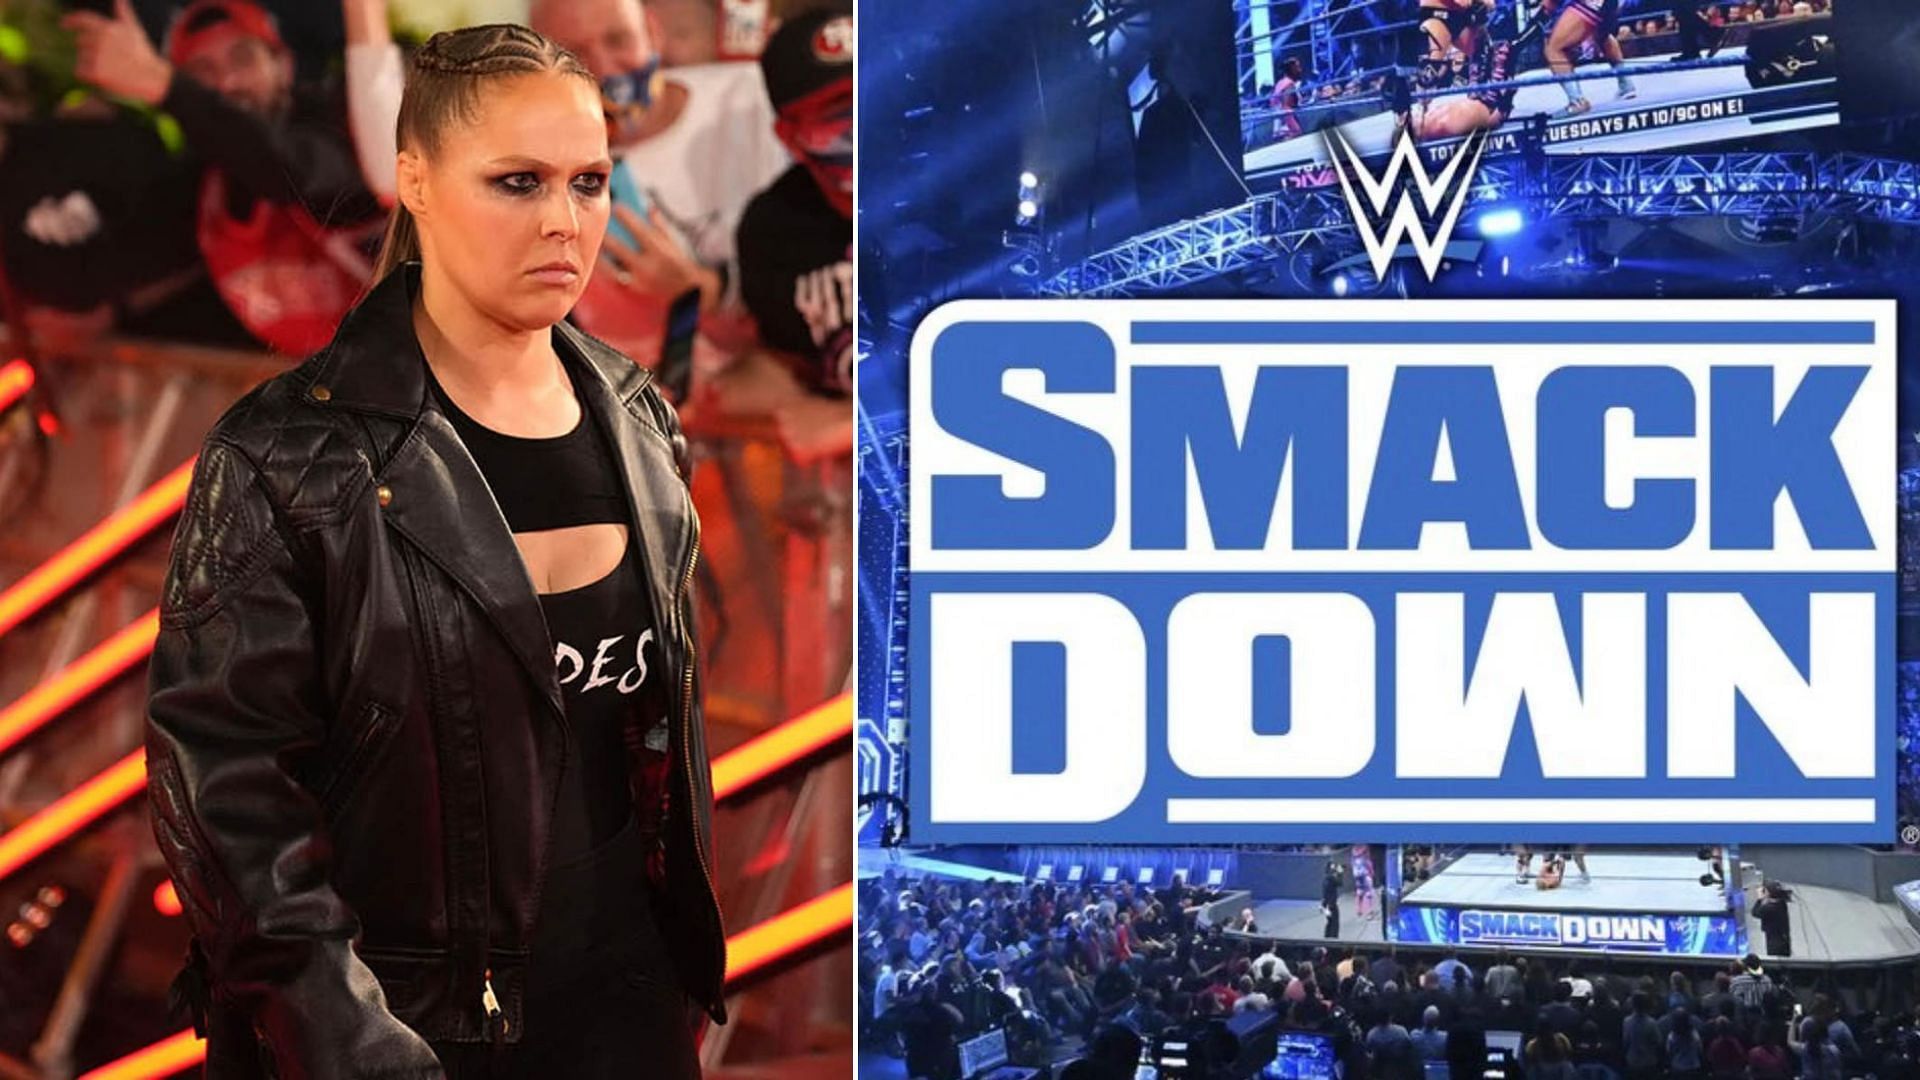 Ronda Rousey took over SmackDown